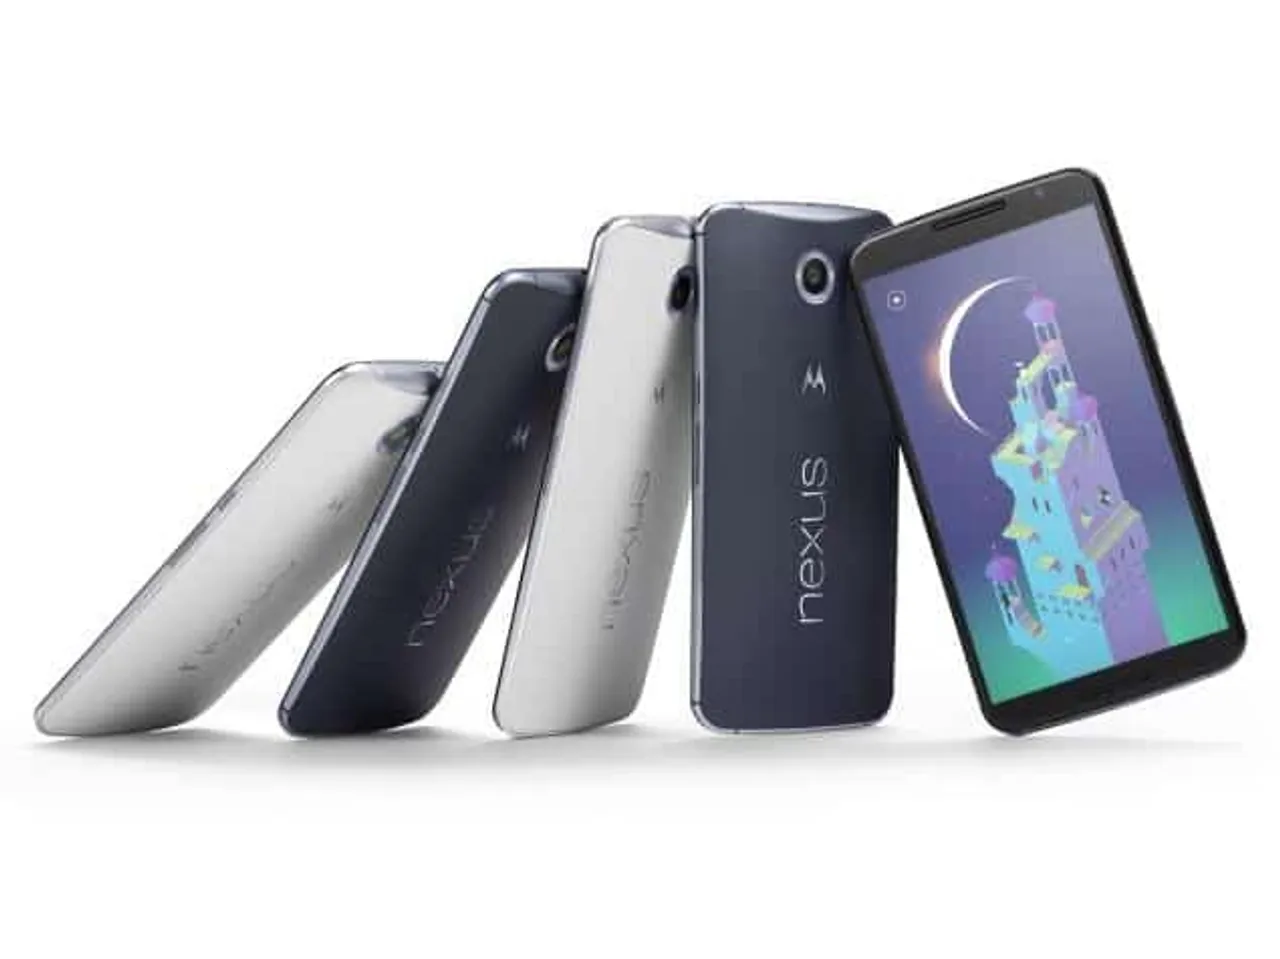 Nexus 6 goes on sale on Overcart.com starting at Rs.25,990